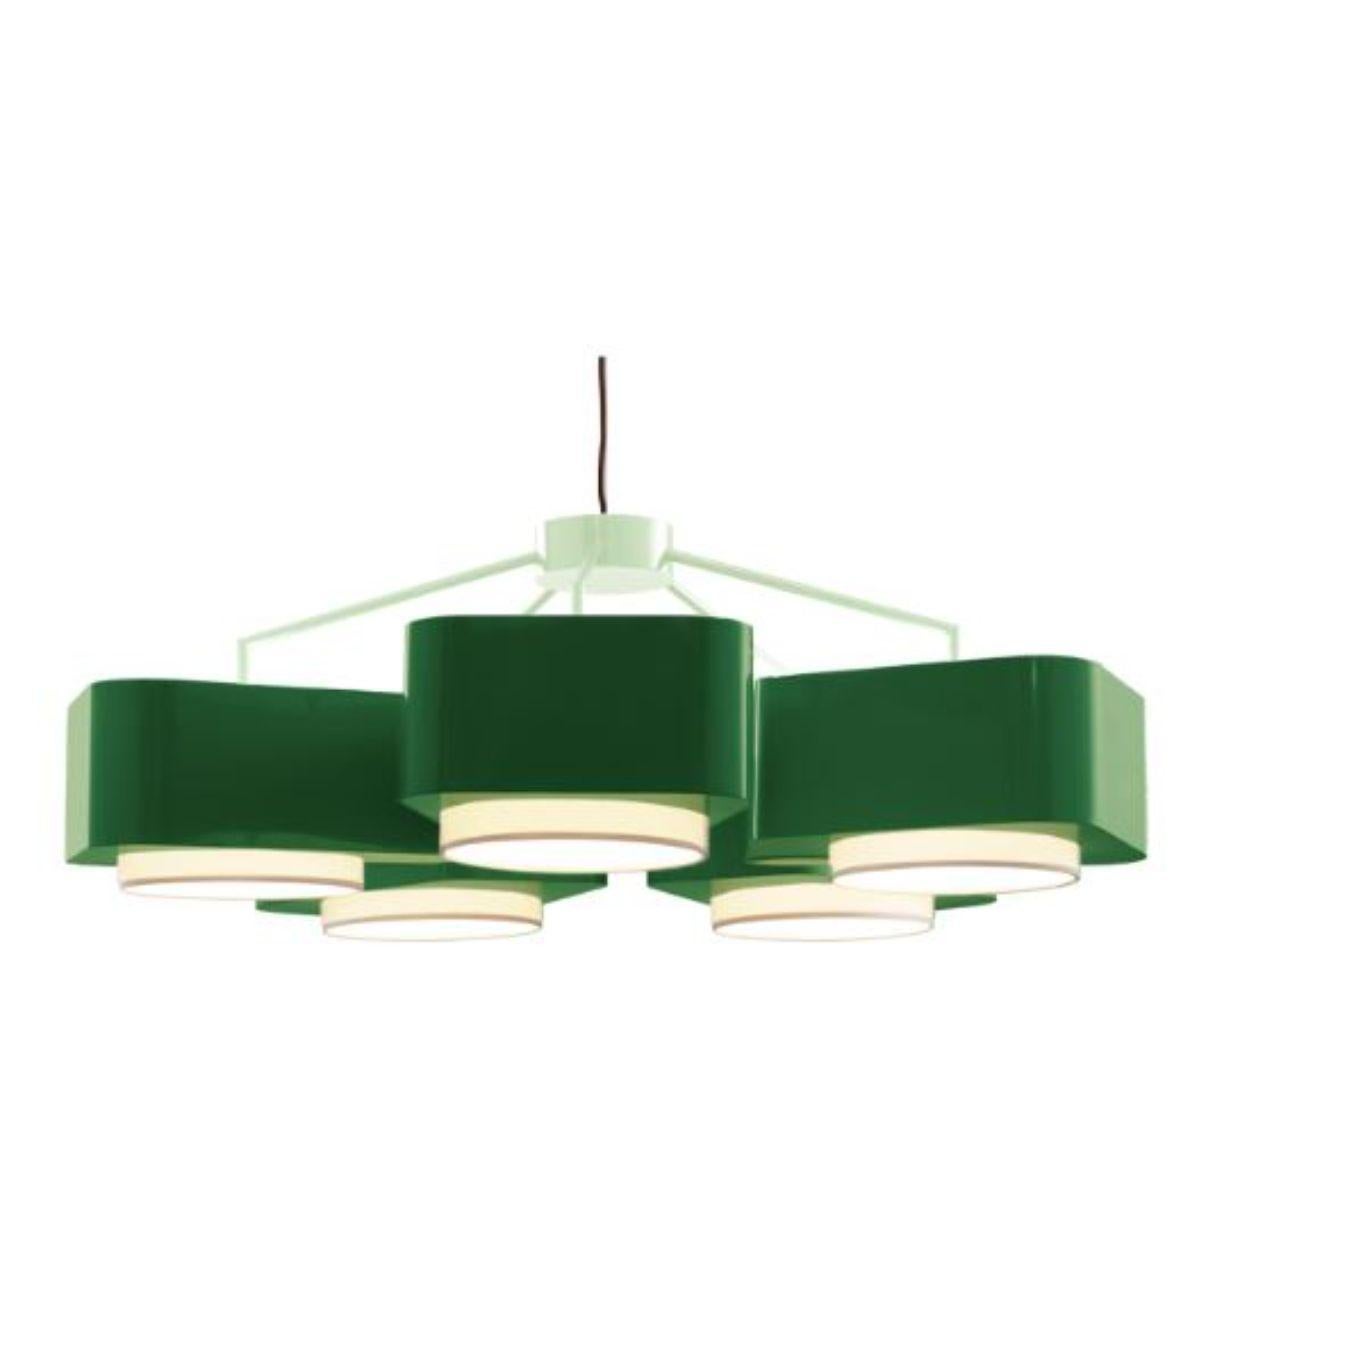 Dream and emerald carousel suspension lamp by Dooq
Dimensions: W 110 x D 110 x H 40 cm
Materials: lacquered metal.
abat-jour: cotton
Also available in different colors.

Information:
230V/50Hz
E27/5x20W LED
120V/60Hz
E26/5x15W LED
bulbs